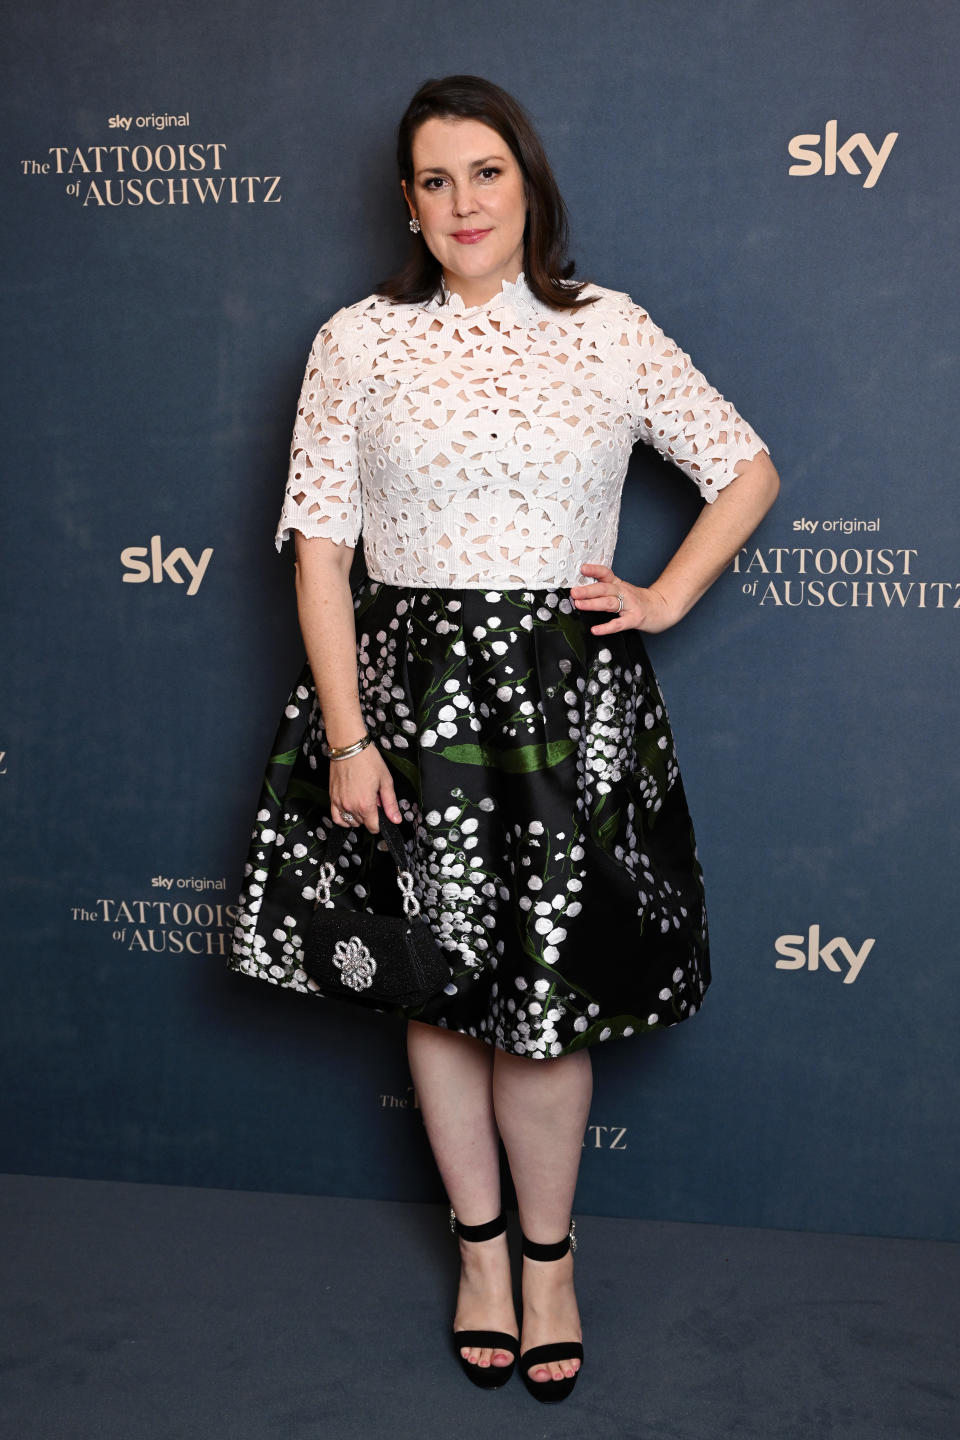 LONDON, ENGLAND - APRIL 09: Melanie Lynskey attends "The Tattooist Of Auschwitz" Gala Screening at BAFTA on April 09, 2024 in London, England. (Photo by Gareth Cattermole/Getty Images)